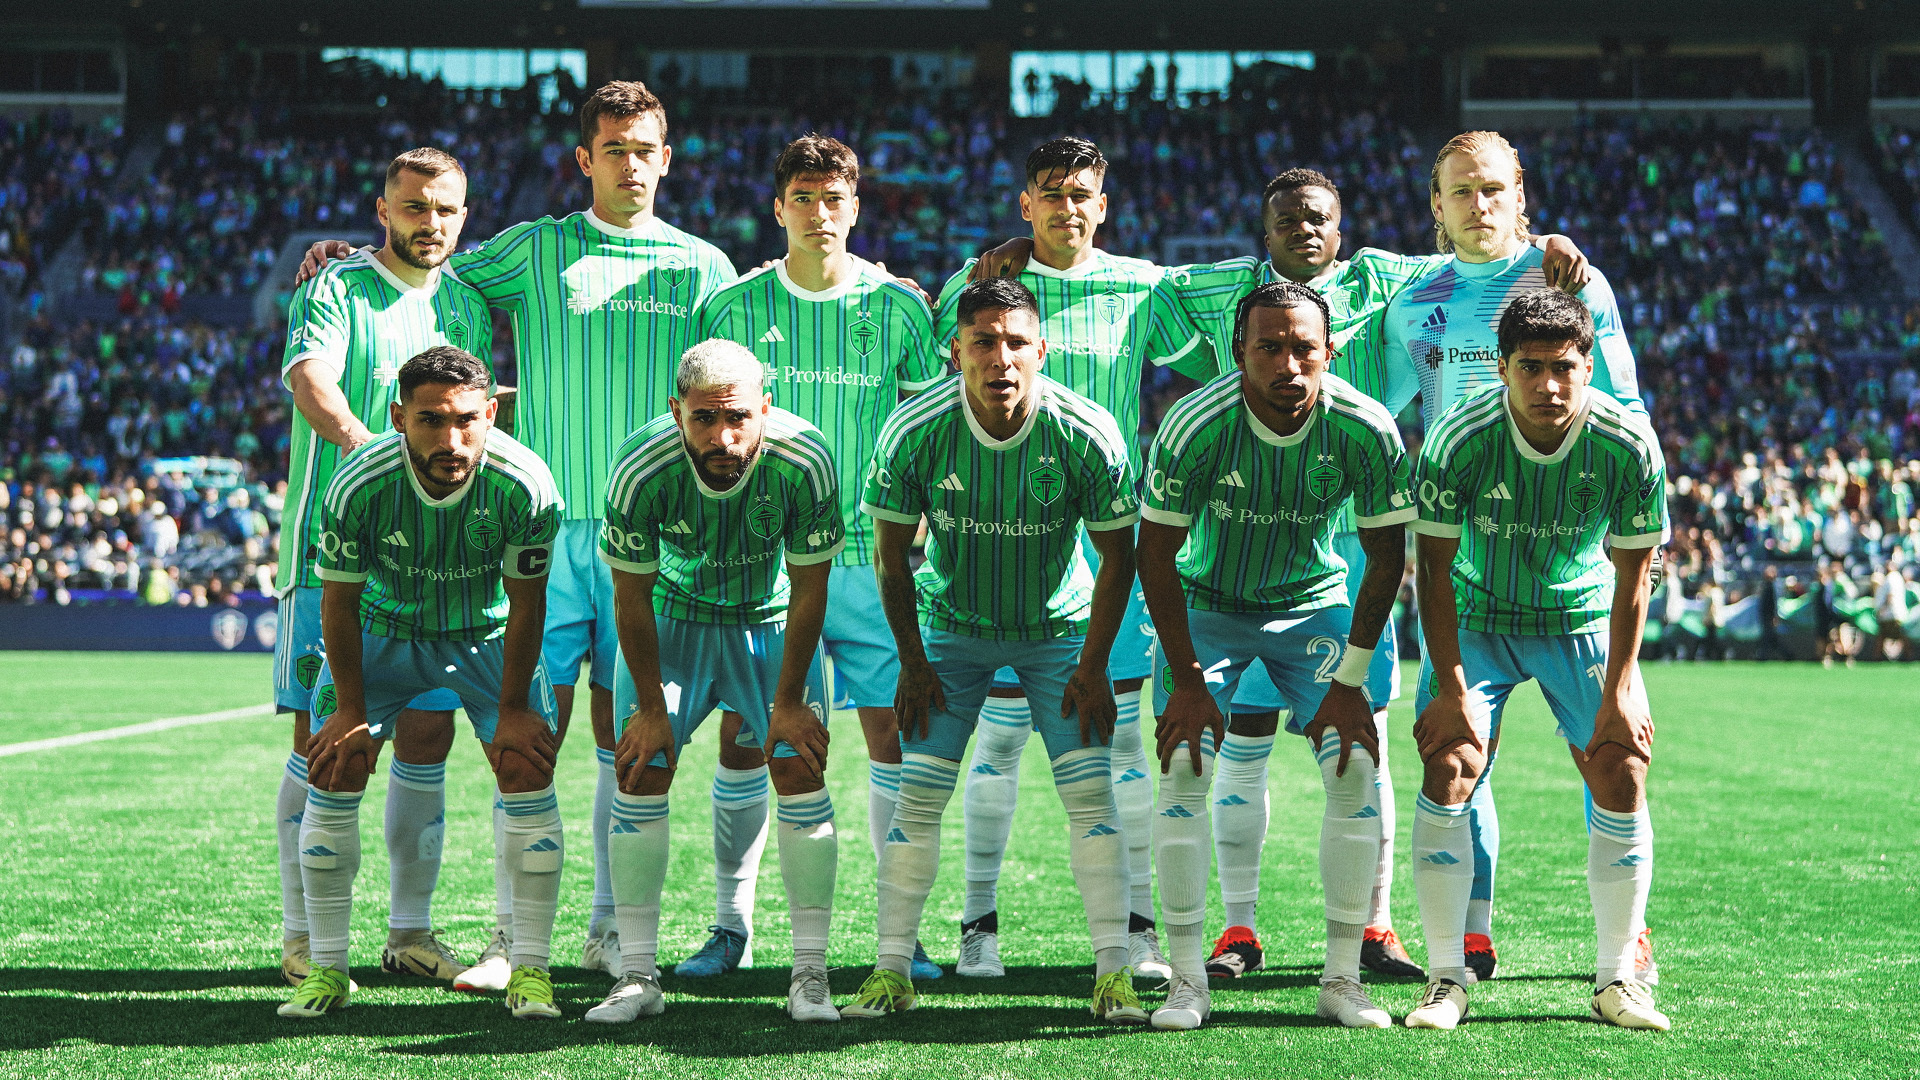 Seattle is struggeling, but we got to be honest, the kits are amazing.